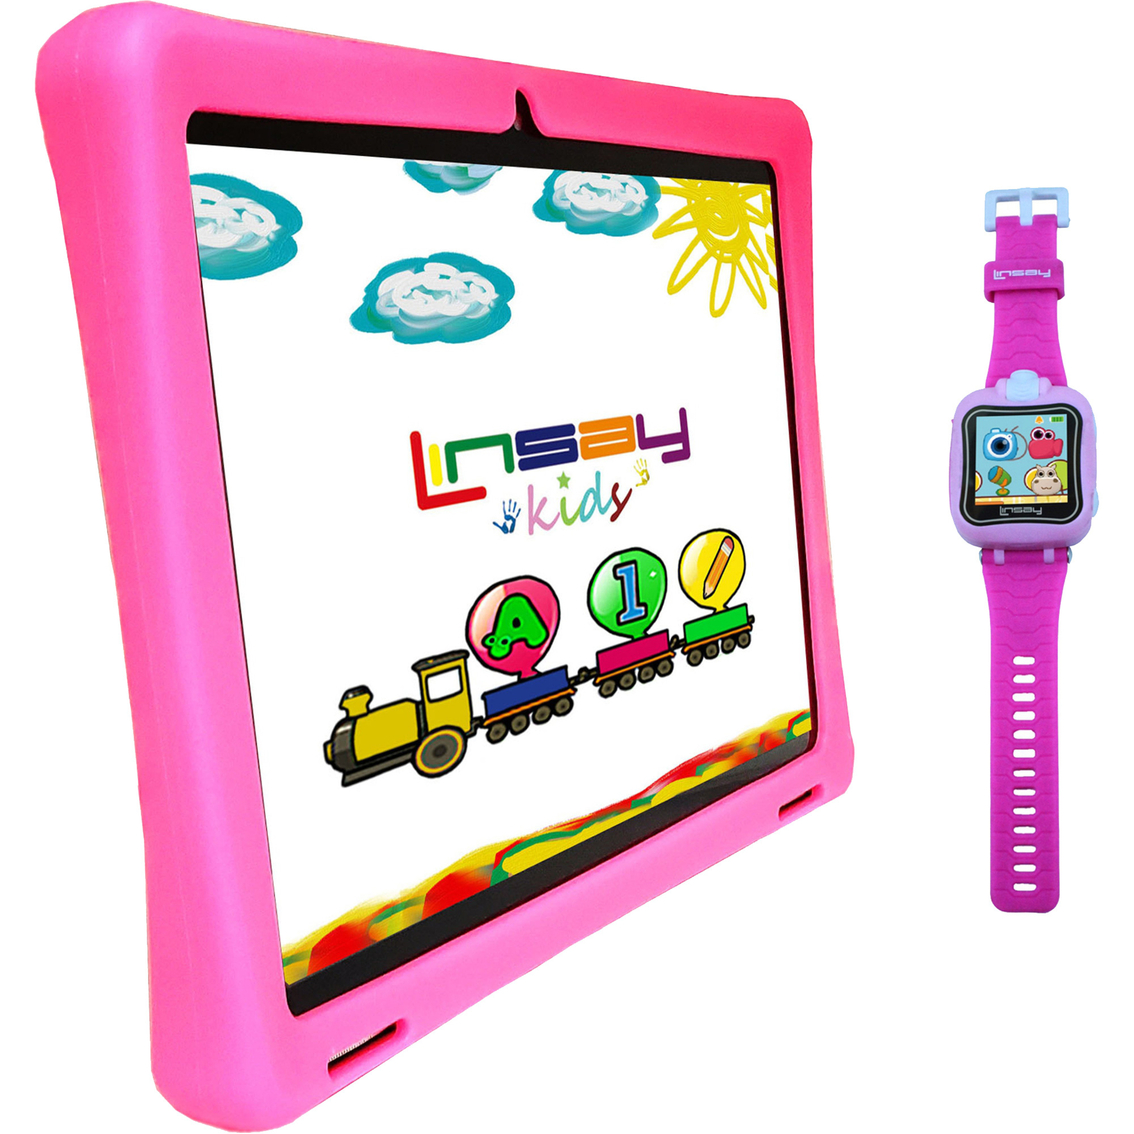 Linsay 10.1 in. 2GB RAM 32GB Tablet with Case, Smartwatch, Holder and Pen Bundle - Image 3 of 3